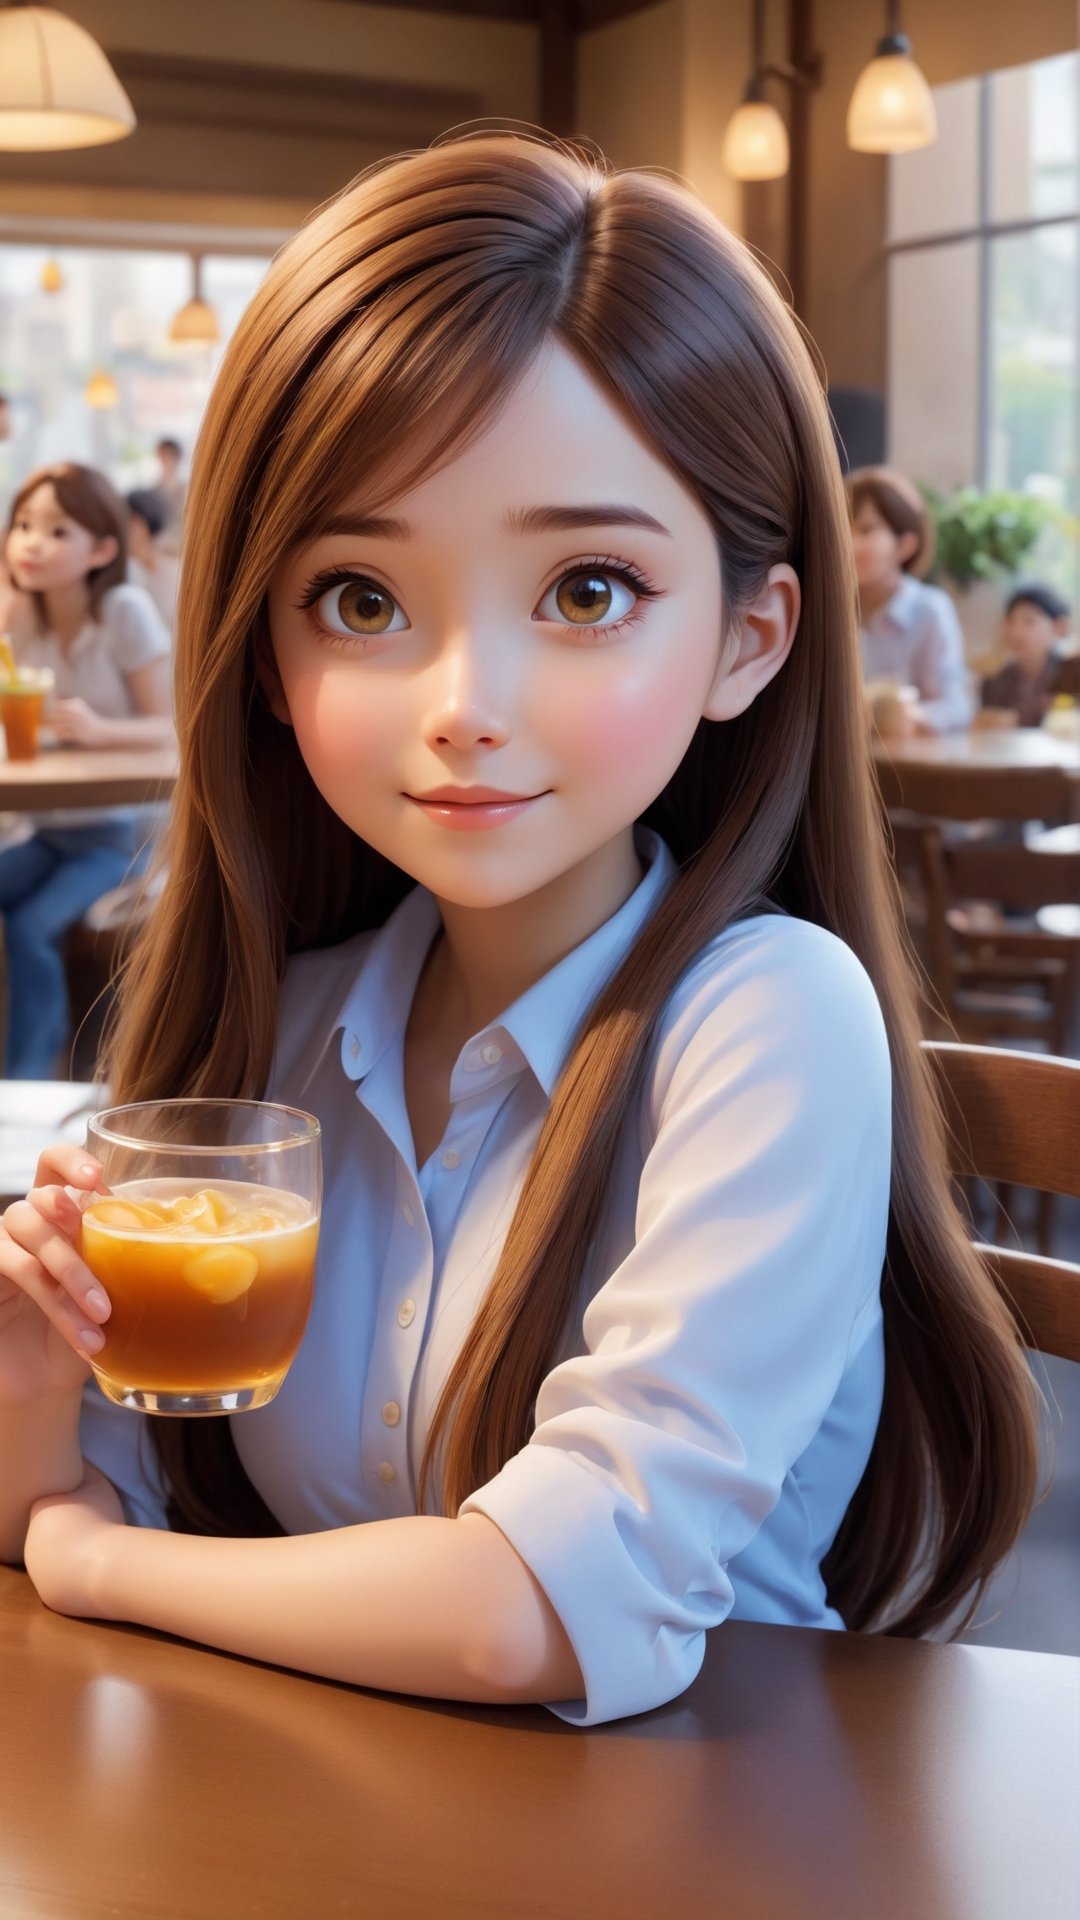 Pixar anime movie scene style, Disney anime scene style, an anime girl drinking at a table, in the style of realistic images, childlike, realistic lifelike figures, he Jiaying, white and brown, cute and colorful, shiny/glossy, Realistic photograph, high quality, portrait photograph